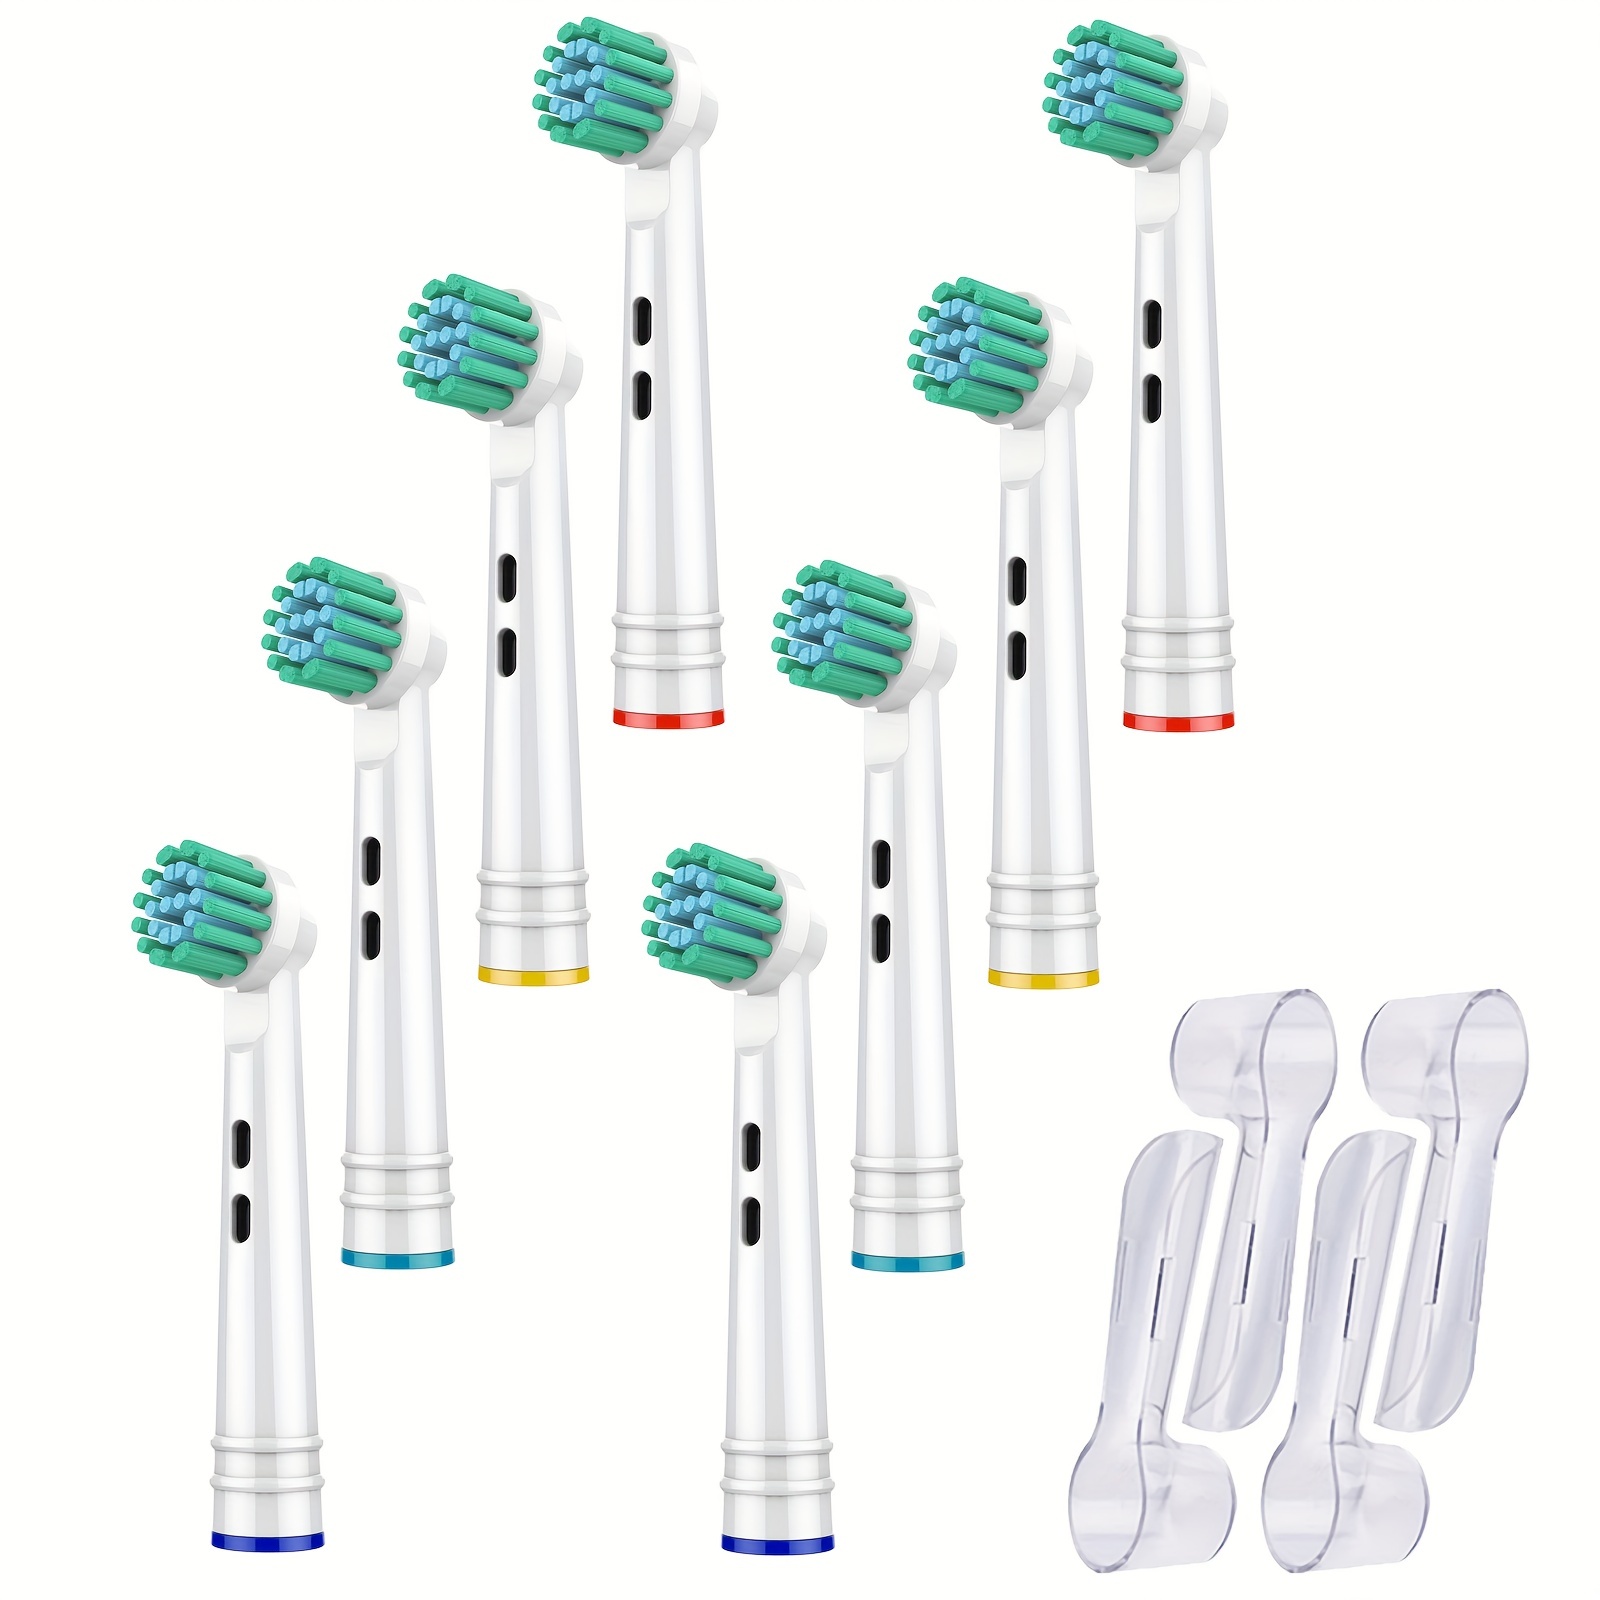 Braun Oral B Electric Toothbrush Heads Replacement Head Cross